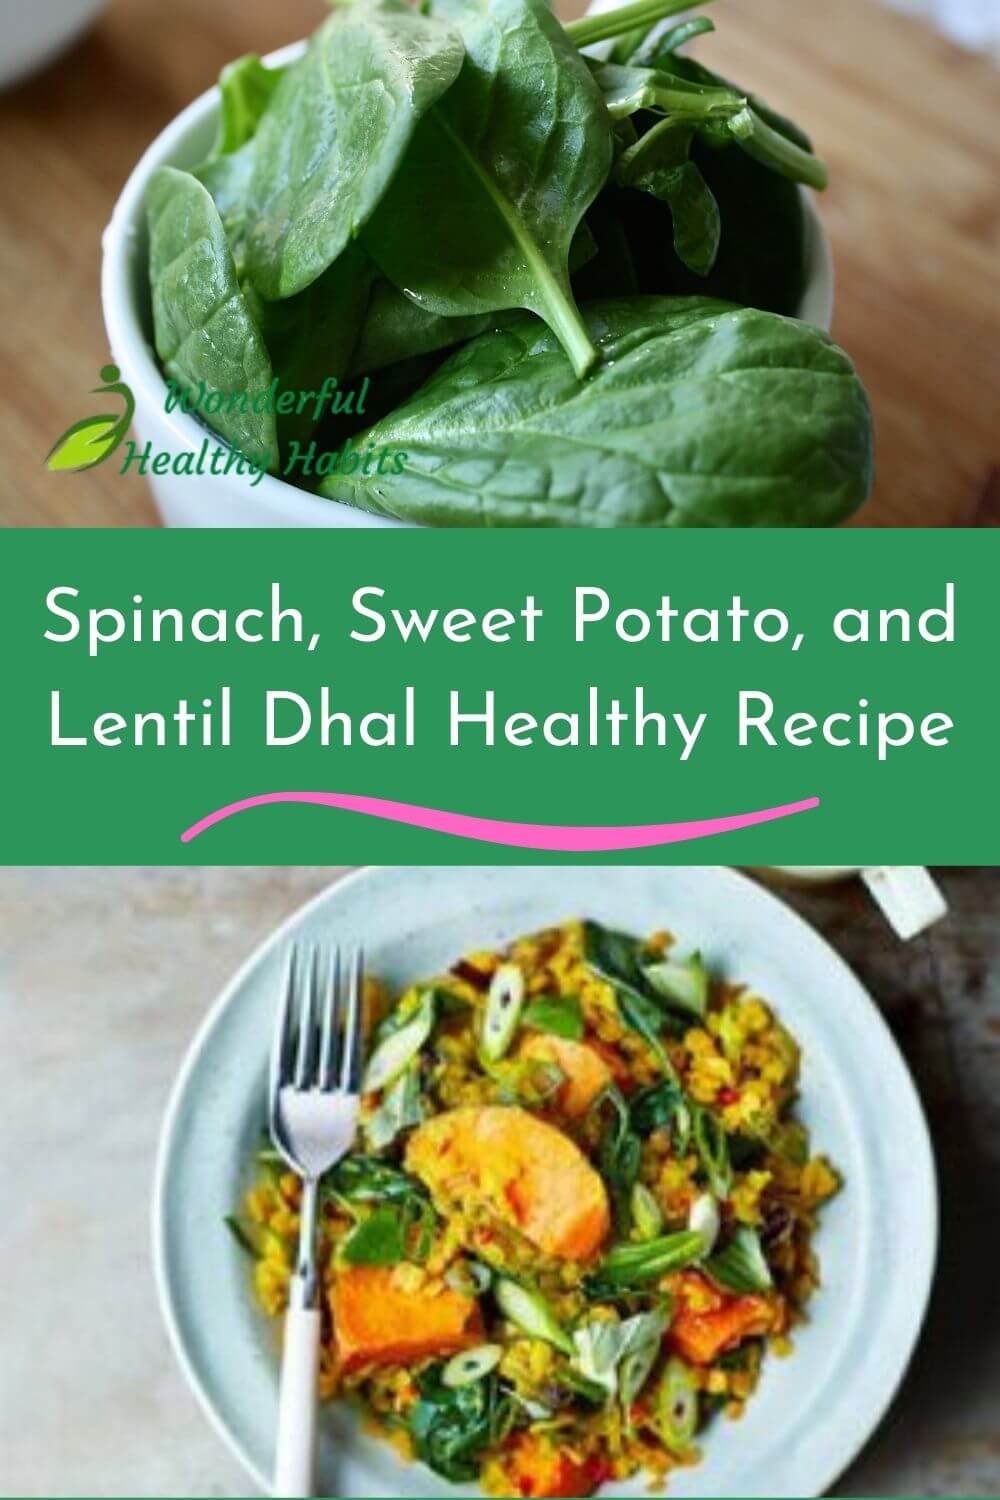 Spinach, Sweet Potato, and Lentil Dhal Healthy Recipe